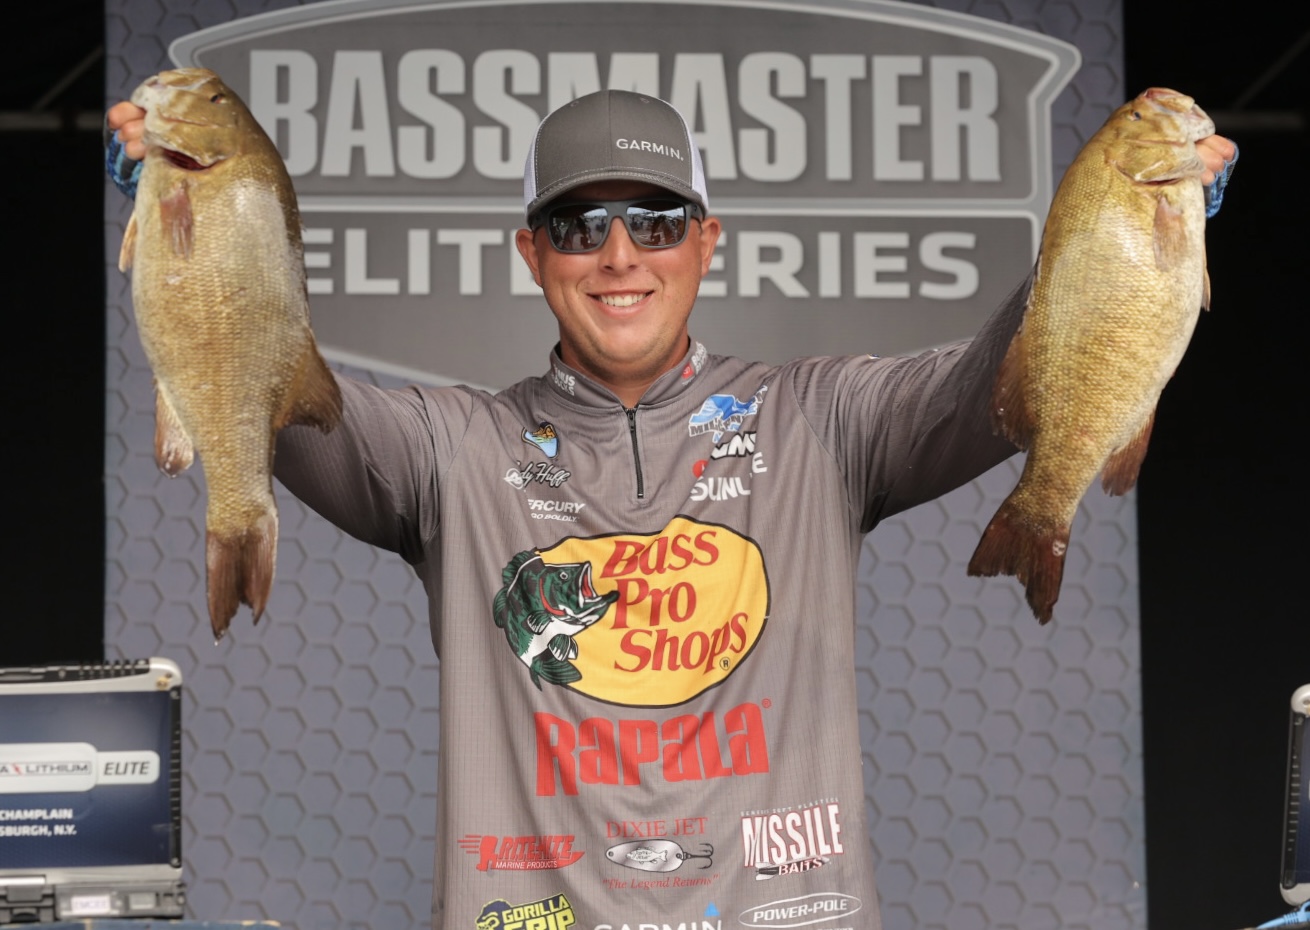 JEFF KRIET: Why a Tube Should be on Your List of Summertime Baits